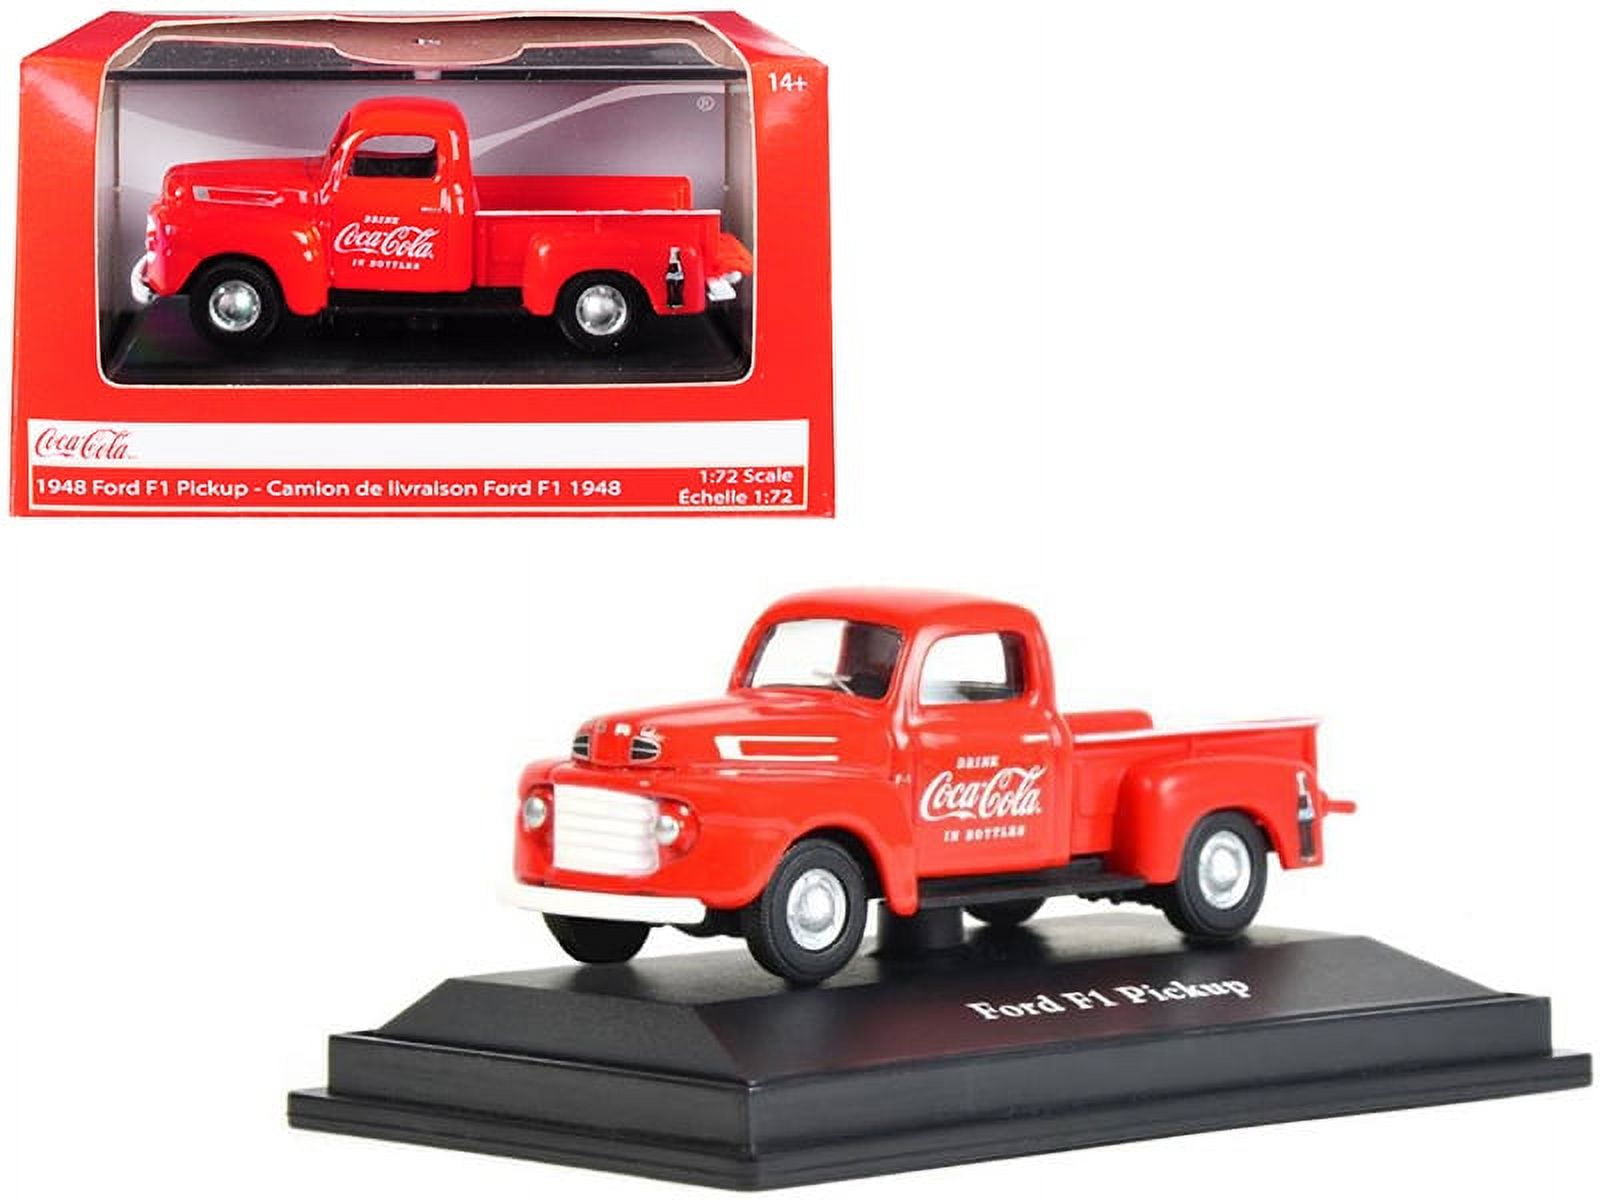 472001 1948 Ford F1 Pickup Truck Coca-cola 1 By 14 2 Diecast Model Car, Red